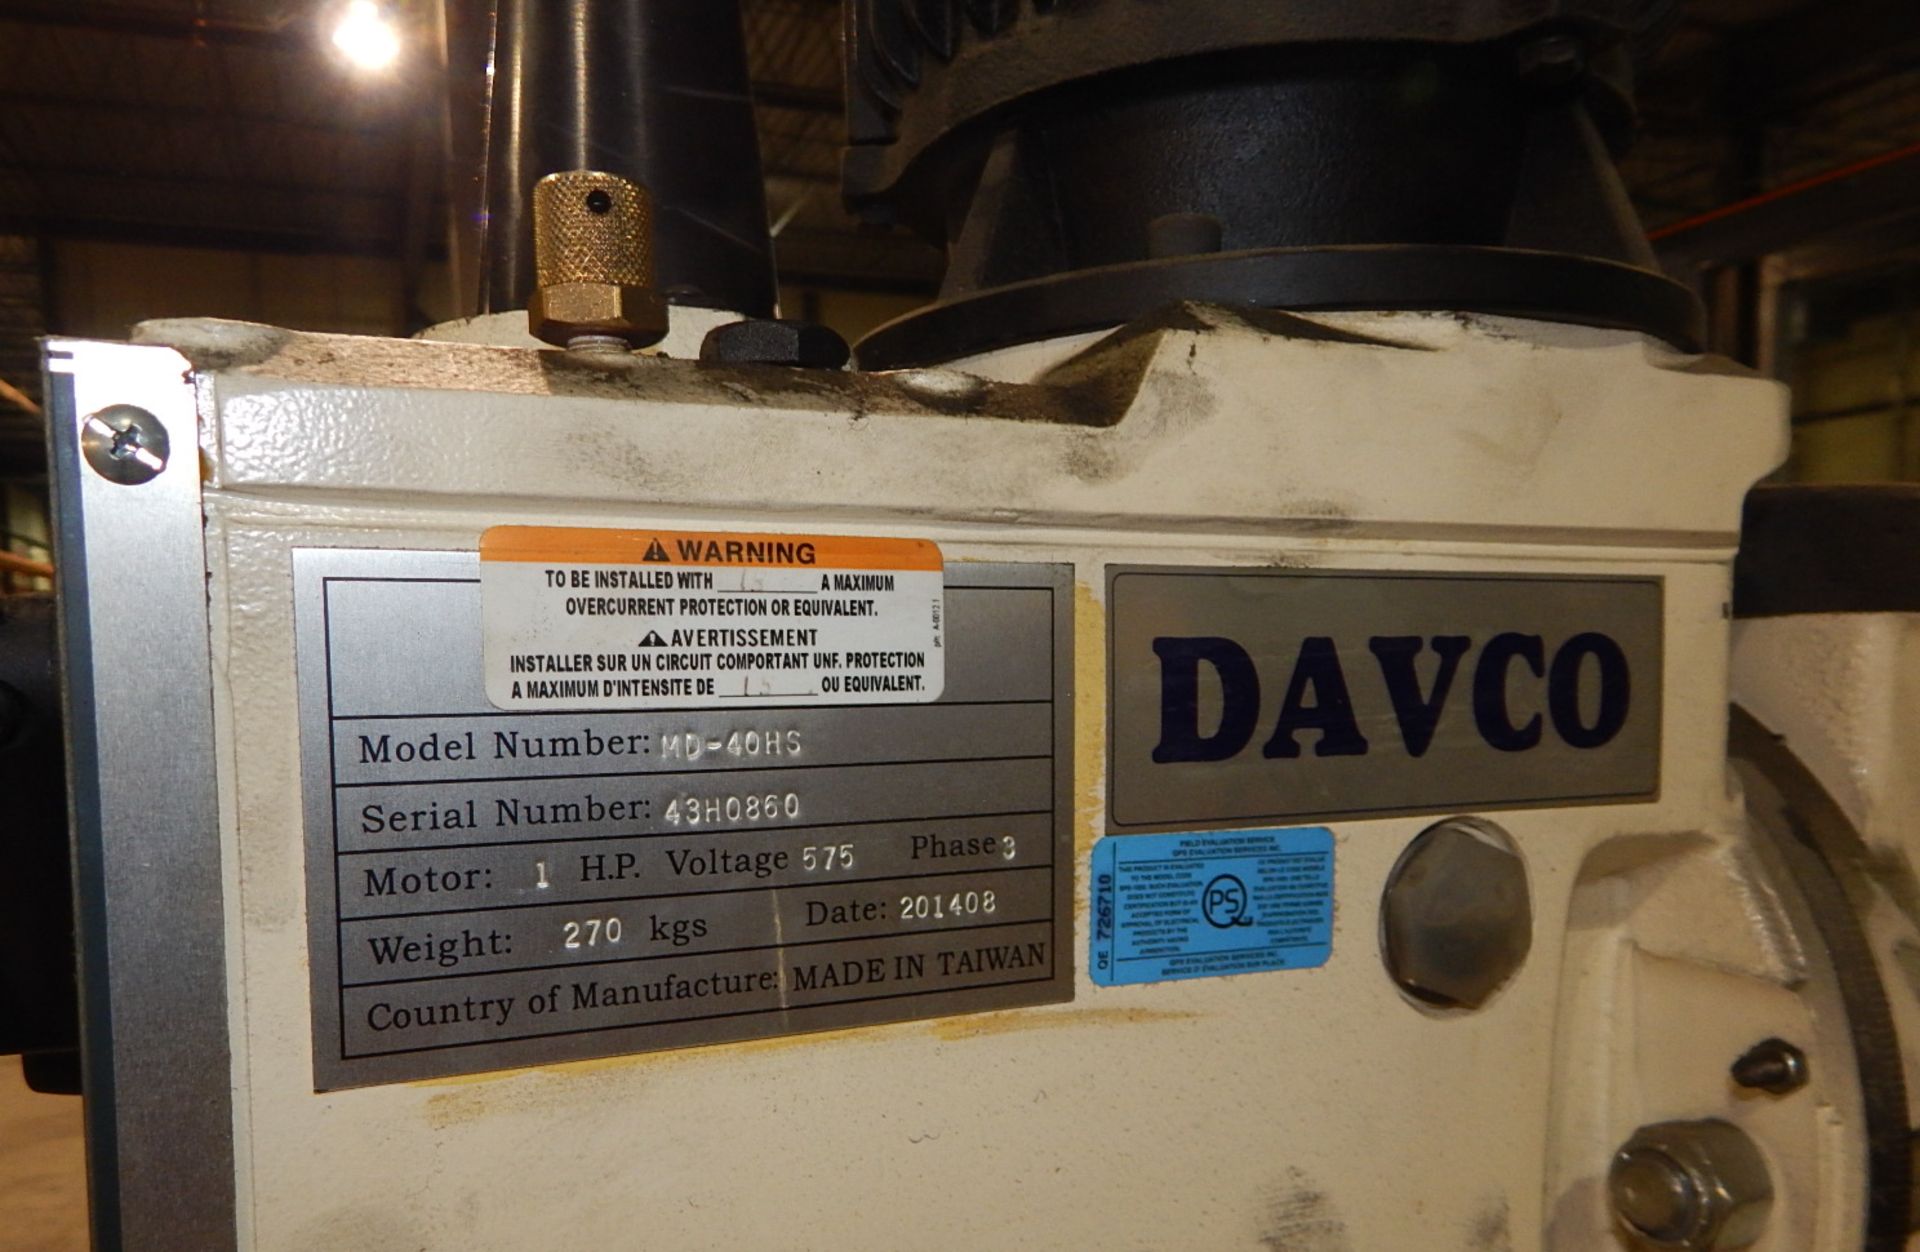 DAVCO (2014) MD-40HS HEAVY DUTY FLOOR TYPE GEARED HEAD MILLING & DRILLING MACHINE WITH 15.5"X18" - Image 4 of 4